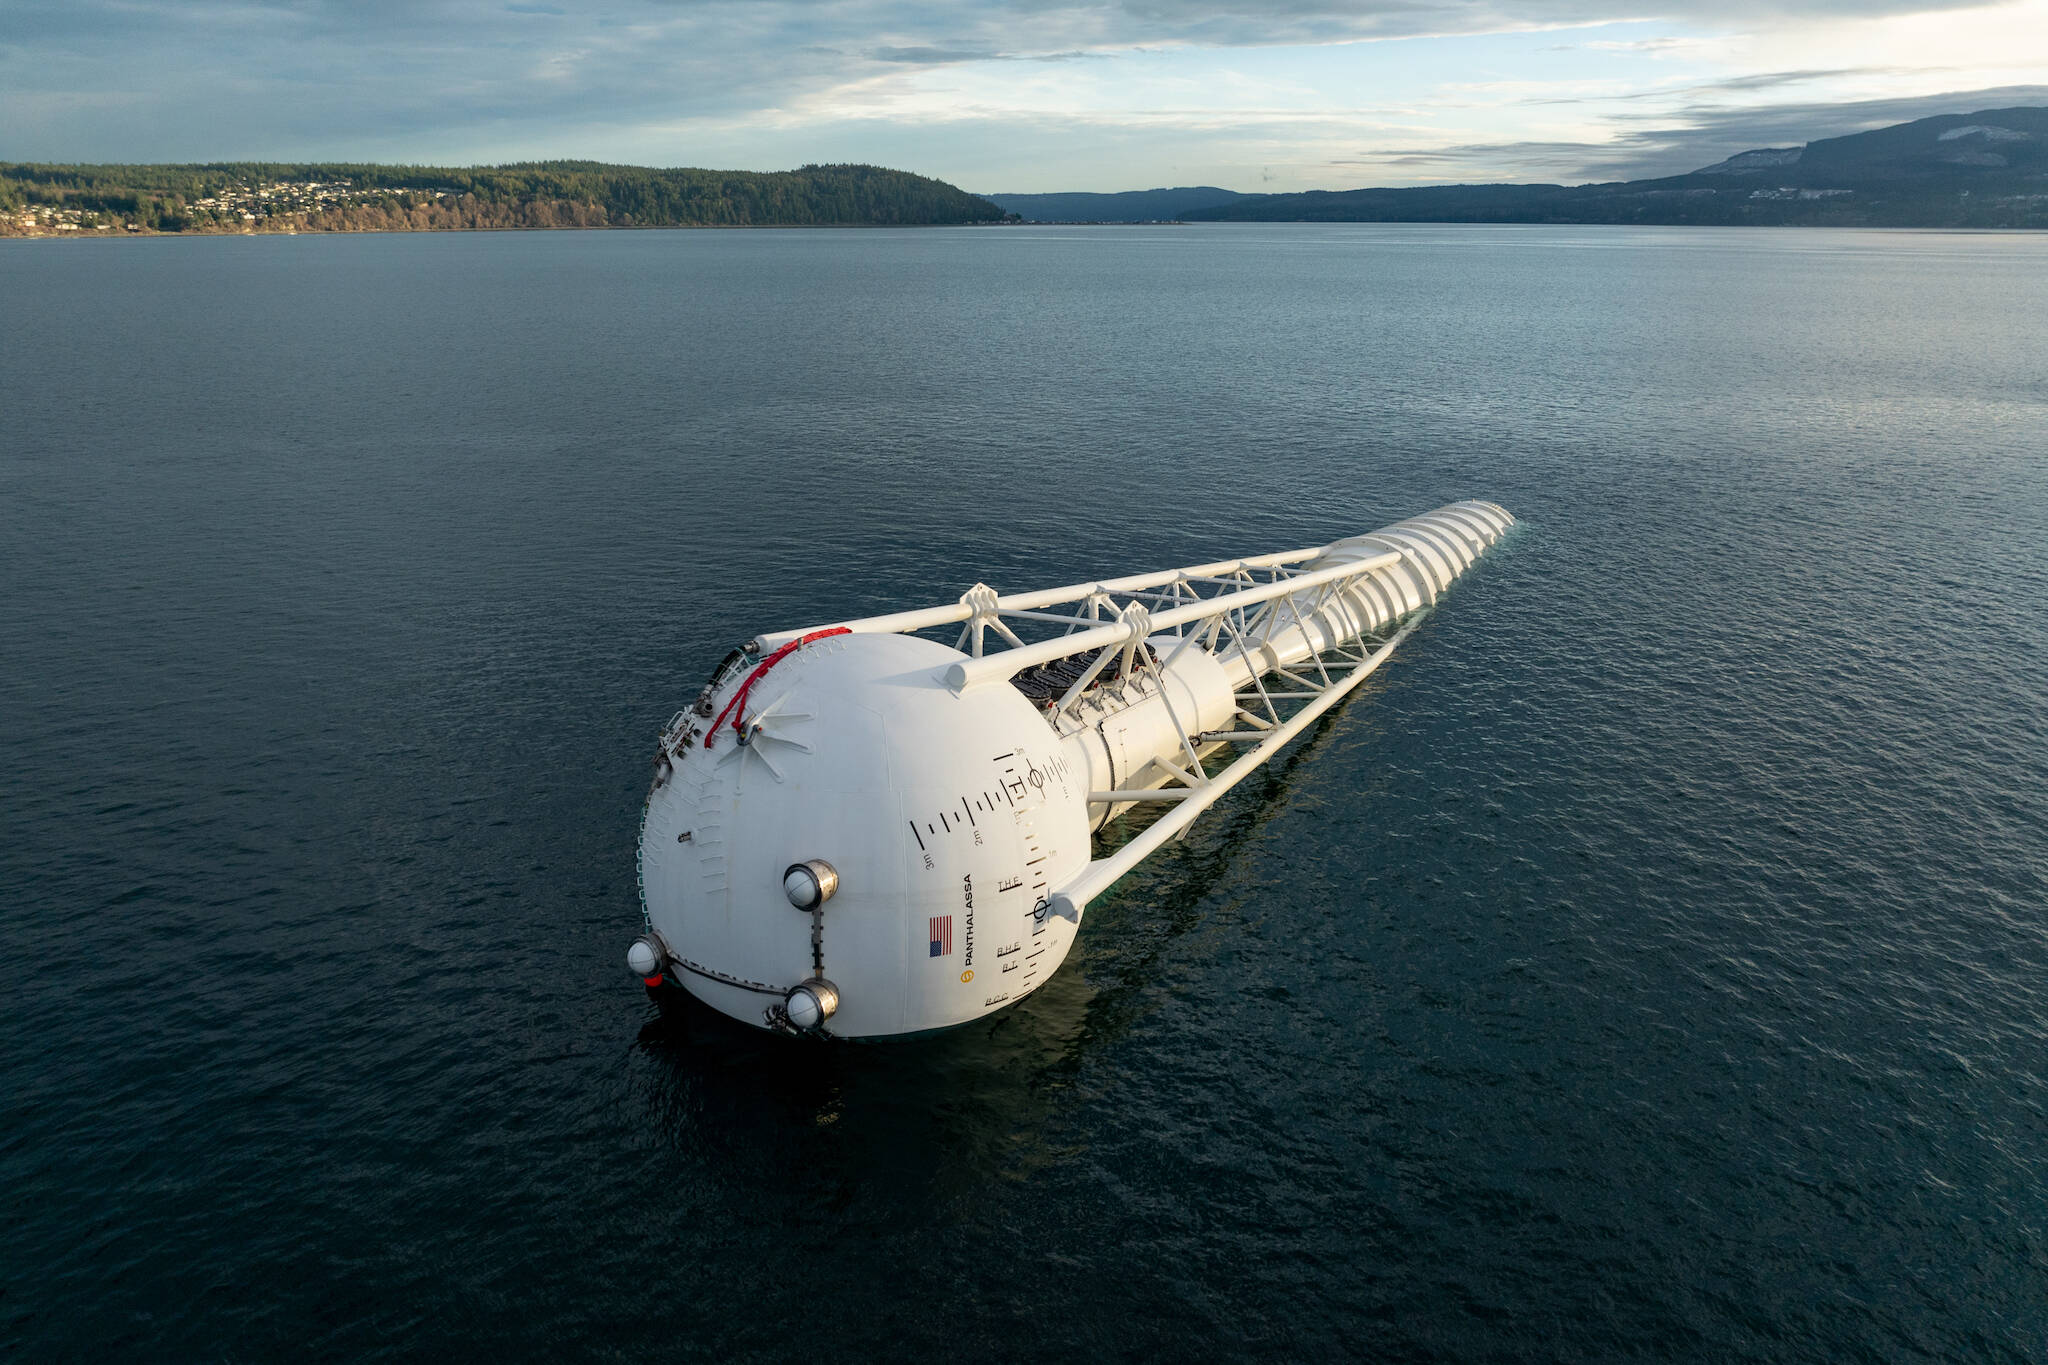 Ocean-2 is a 200-foot prototype for a renewable energy capture buoy made by Panthalassa, an Oregon startup. (Photo provided by Panthalassa)